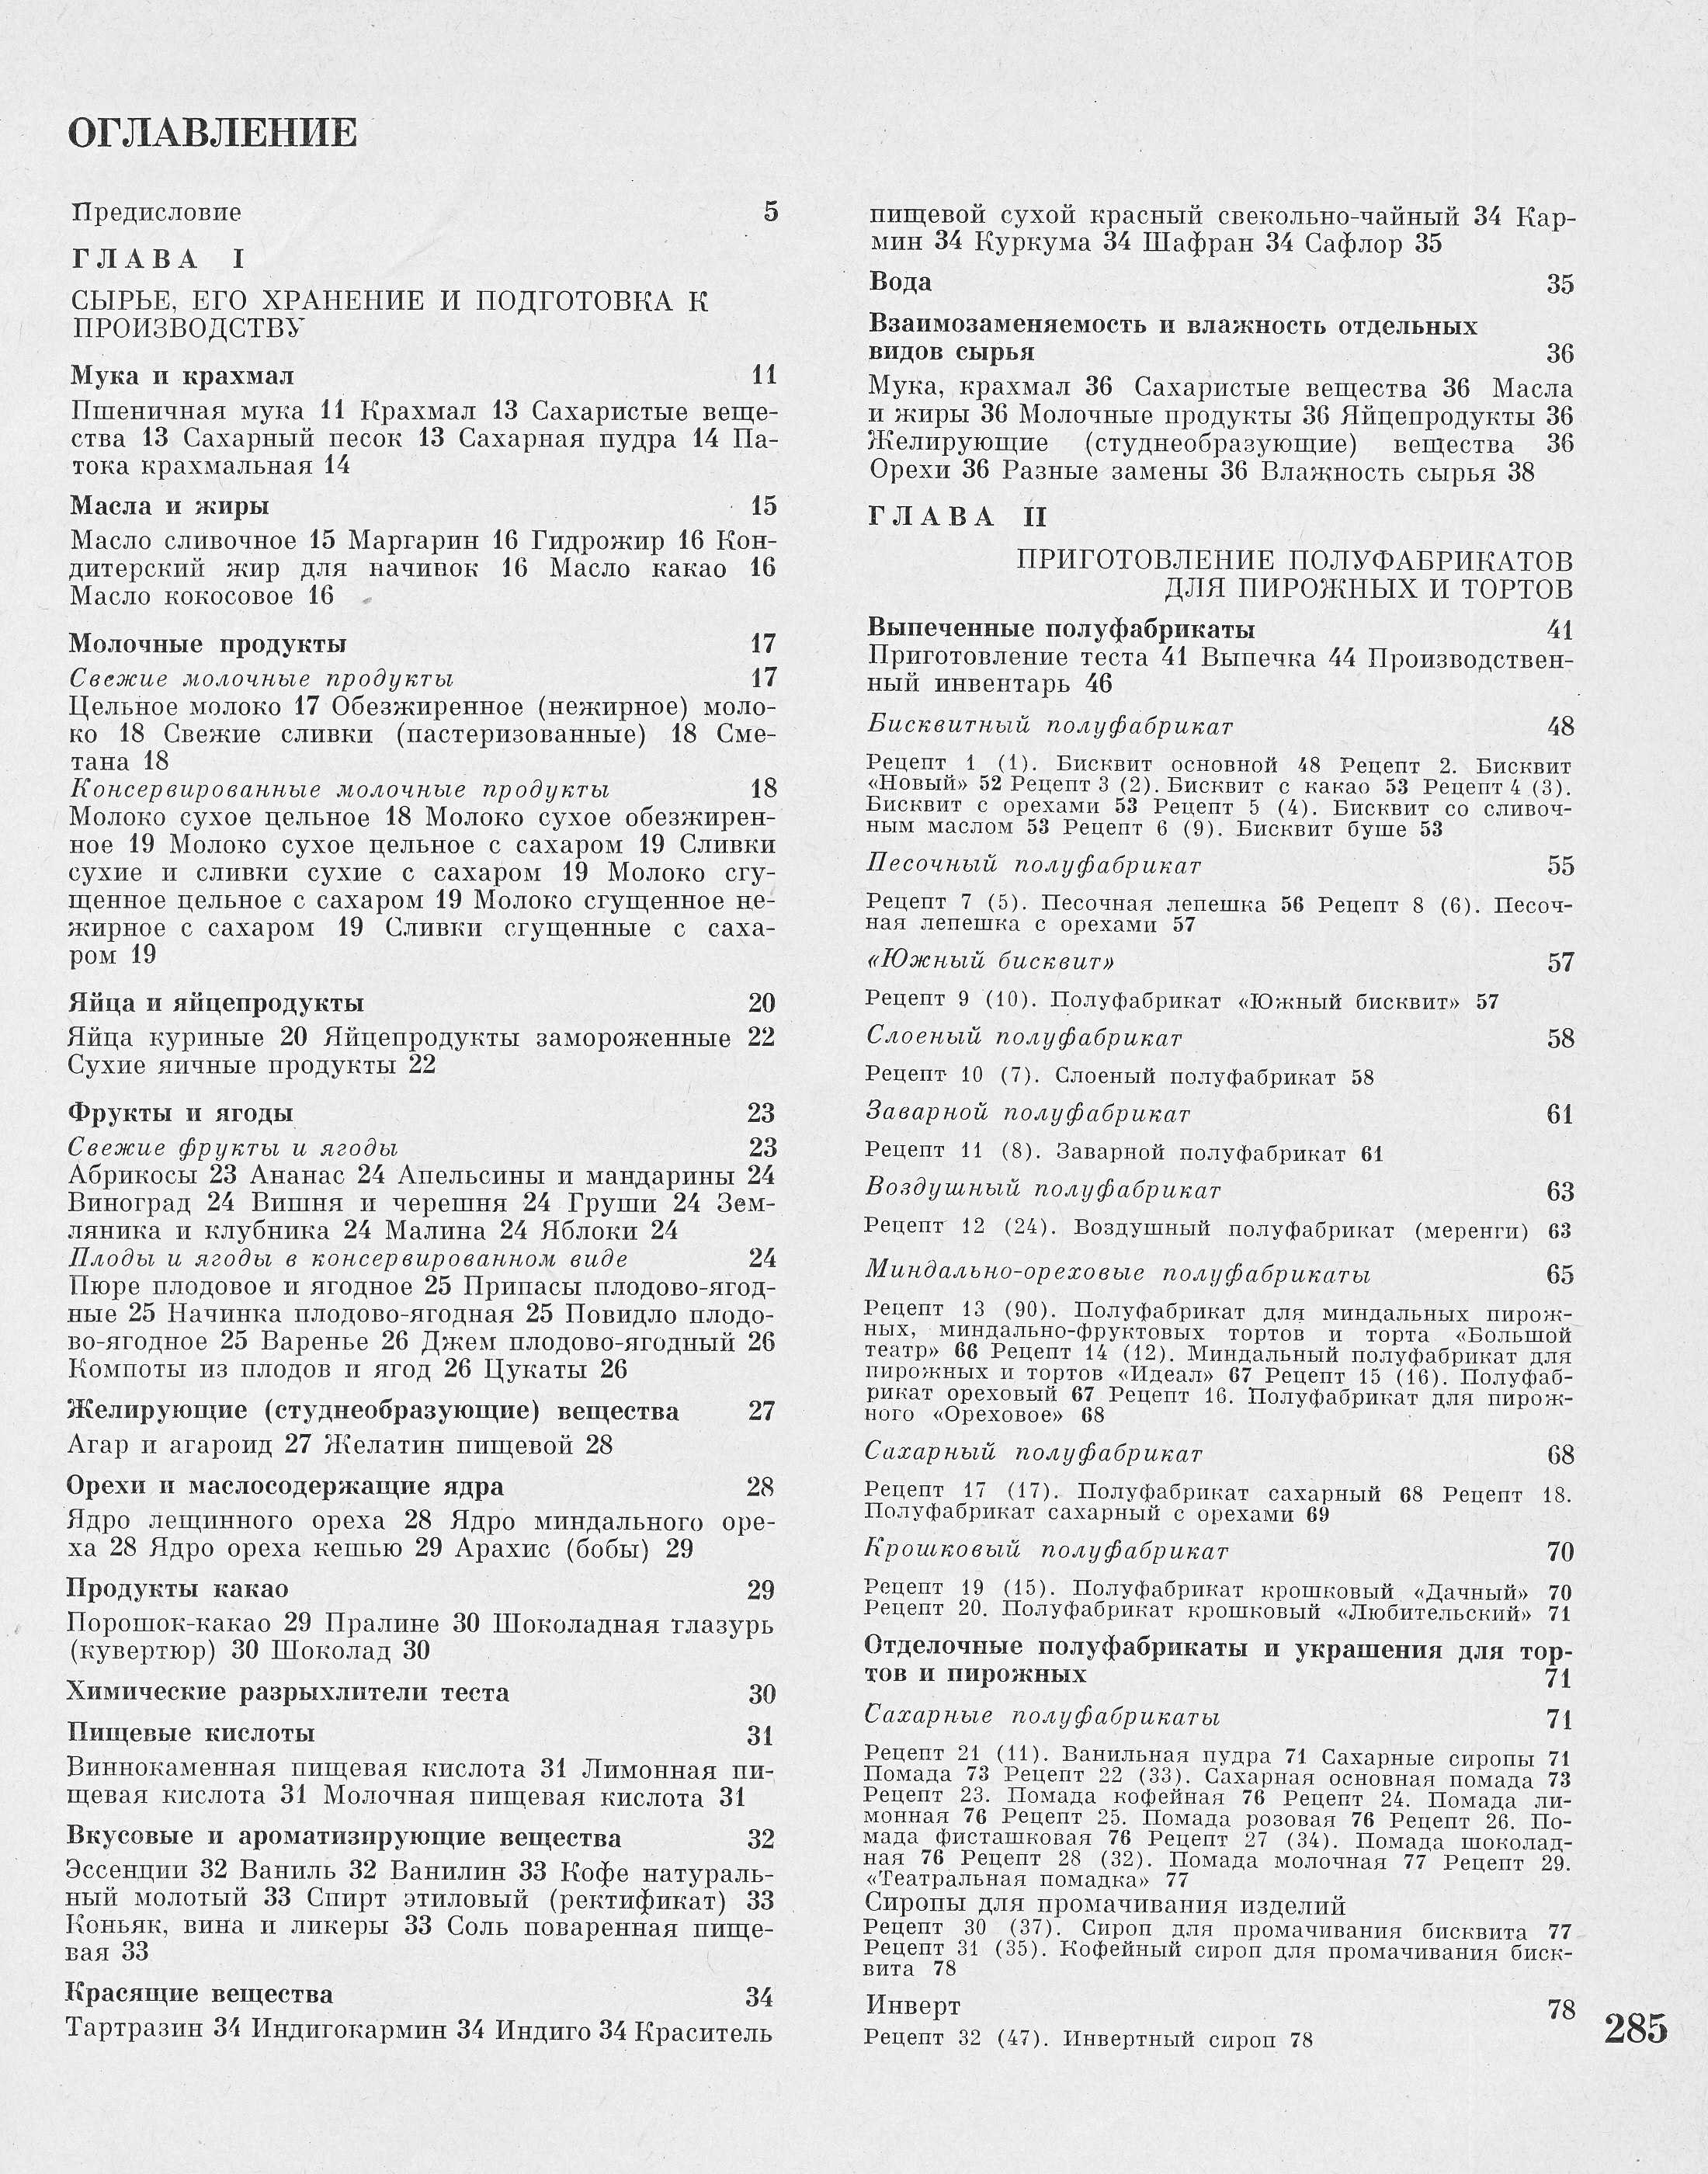 Production of pastries and cakes P.S. Markhel, Yu.L. Gopenshtein, S.V. Smelov 1974  page 285